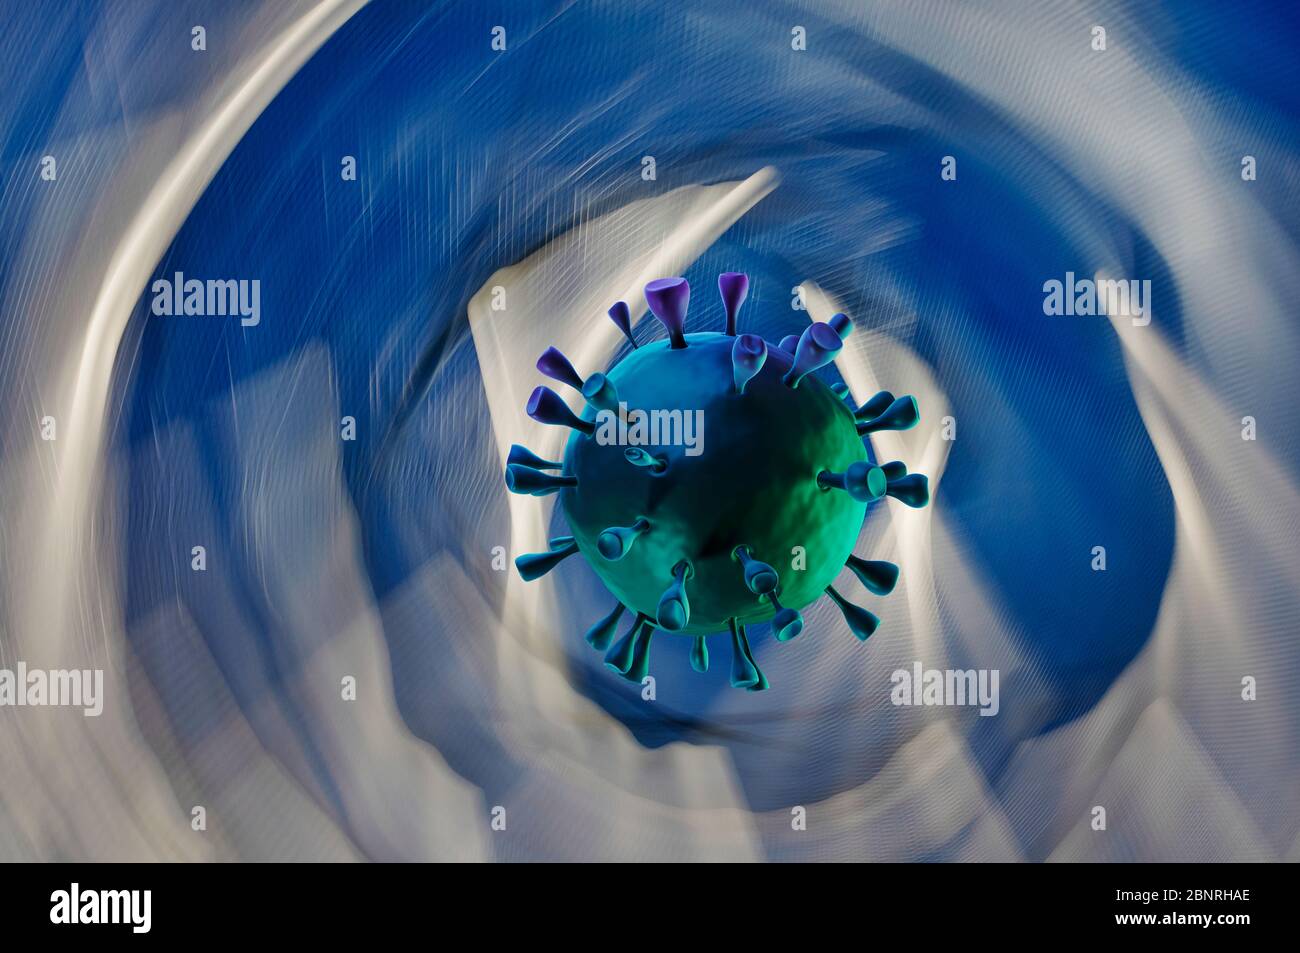 Corona virus in front of abstract background with blurred motion Stock Photo